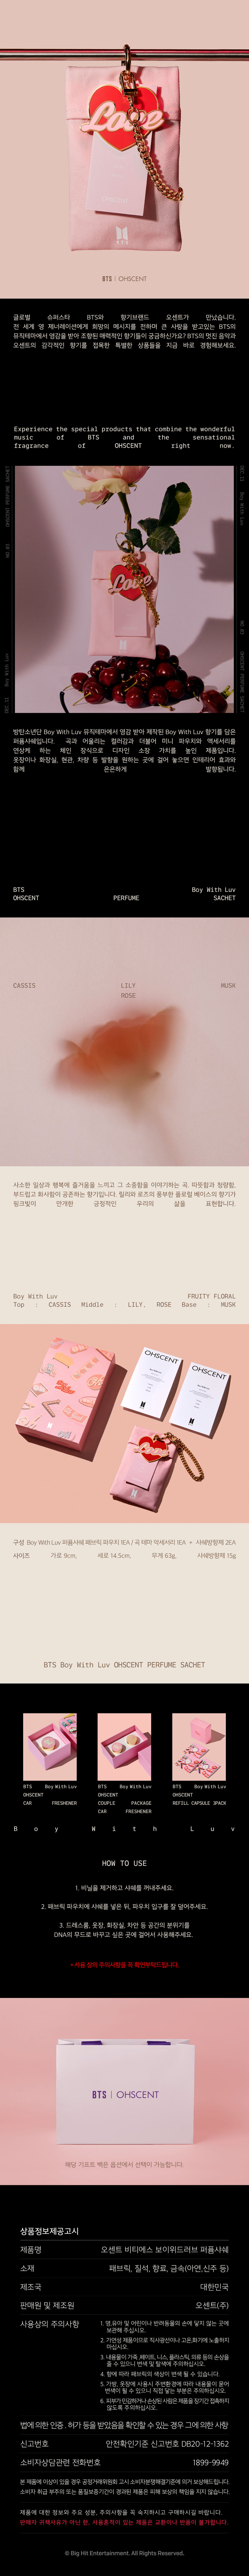 BTS20Boy20With20Luv20OHSCENT20PERFUME20SACHET.png (1000 × 10352)